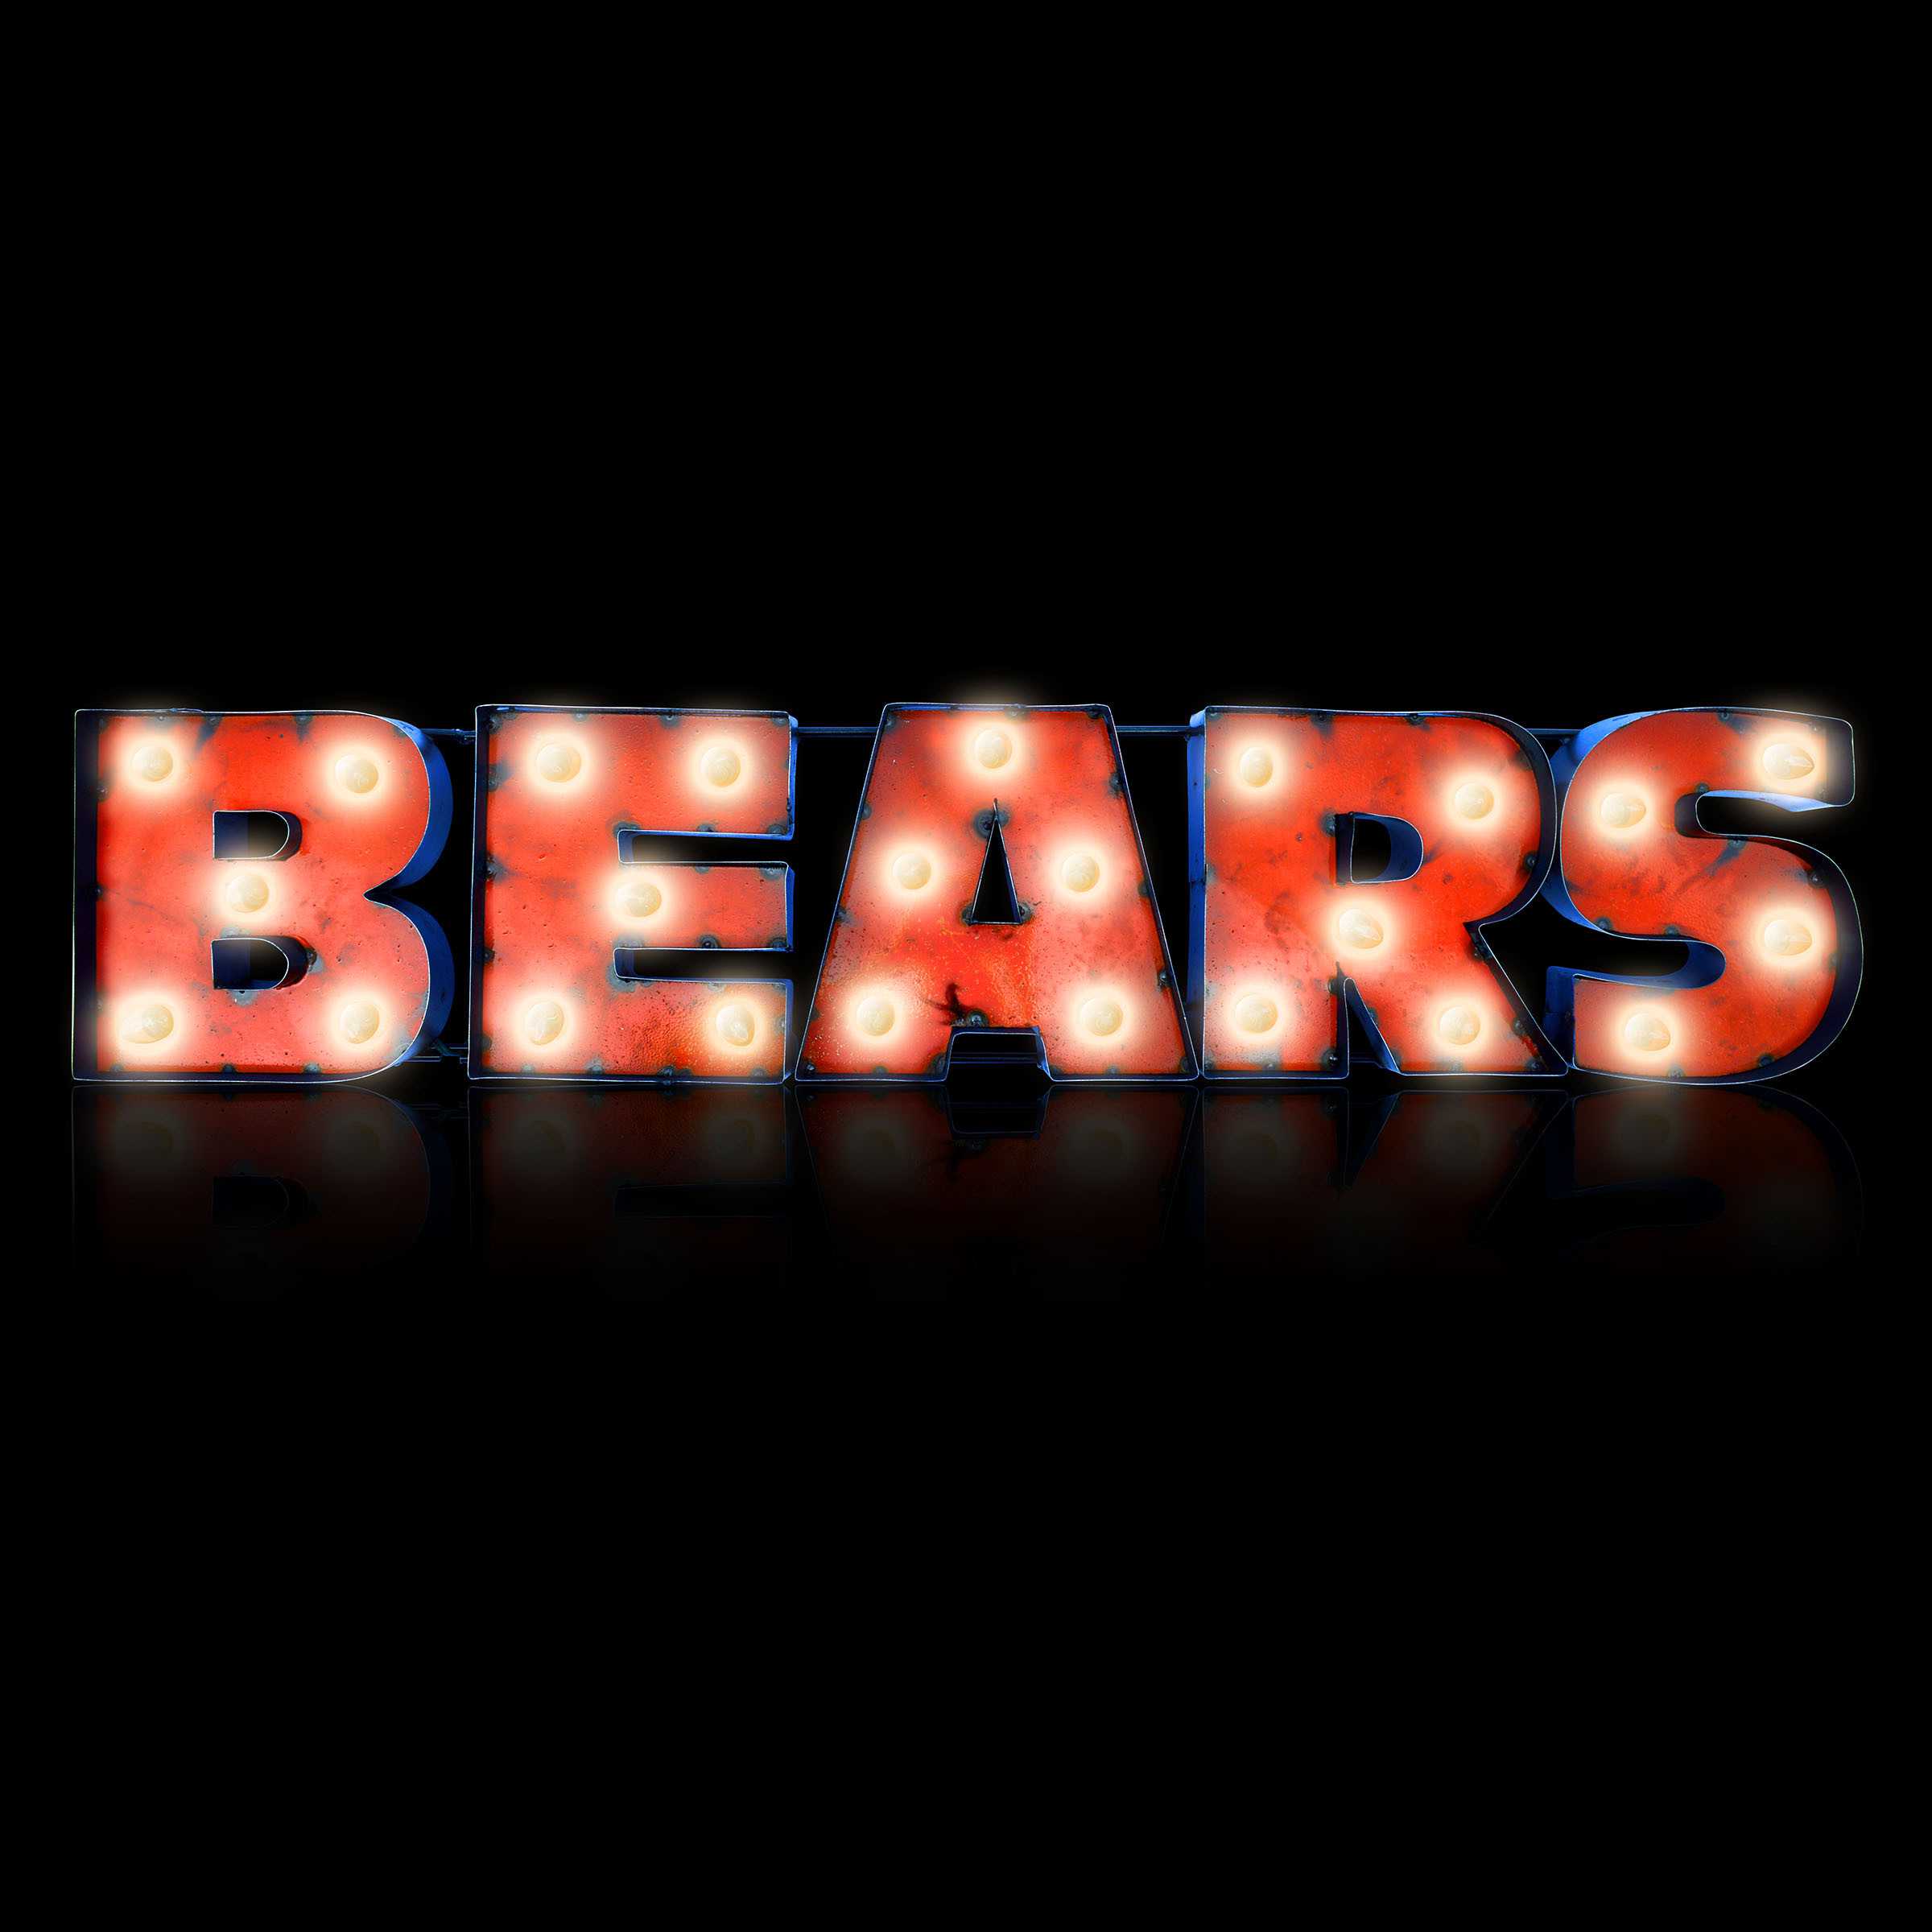 Chicago Bears Lighted Recycled Metal Sign